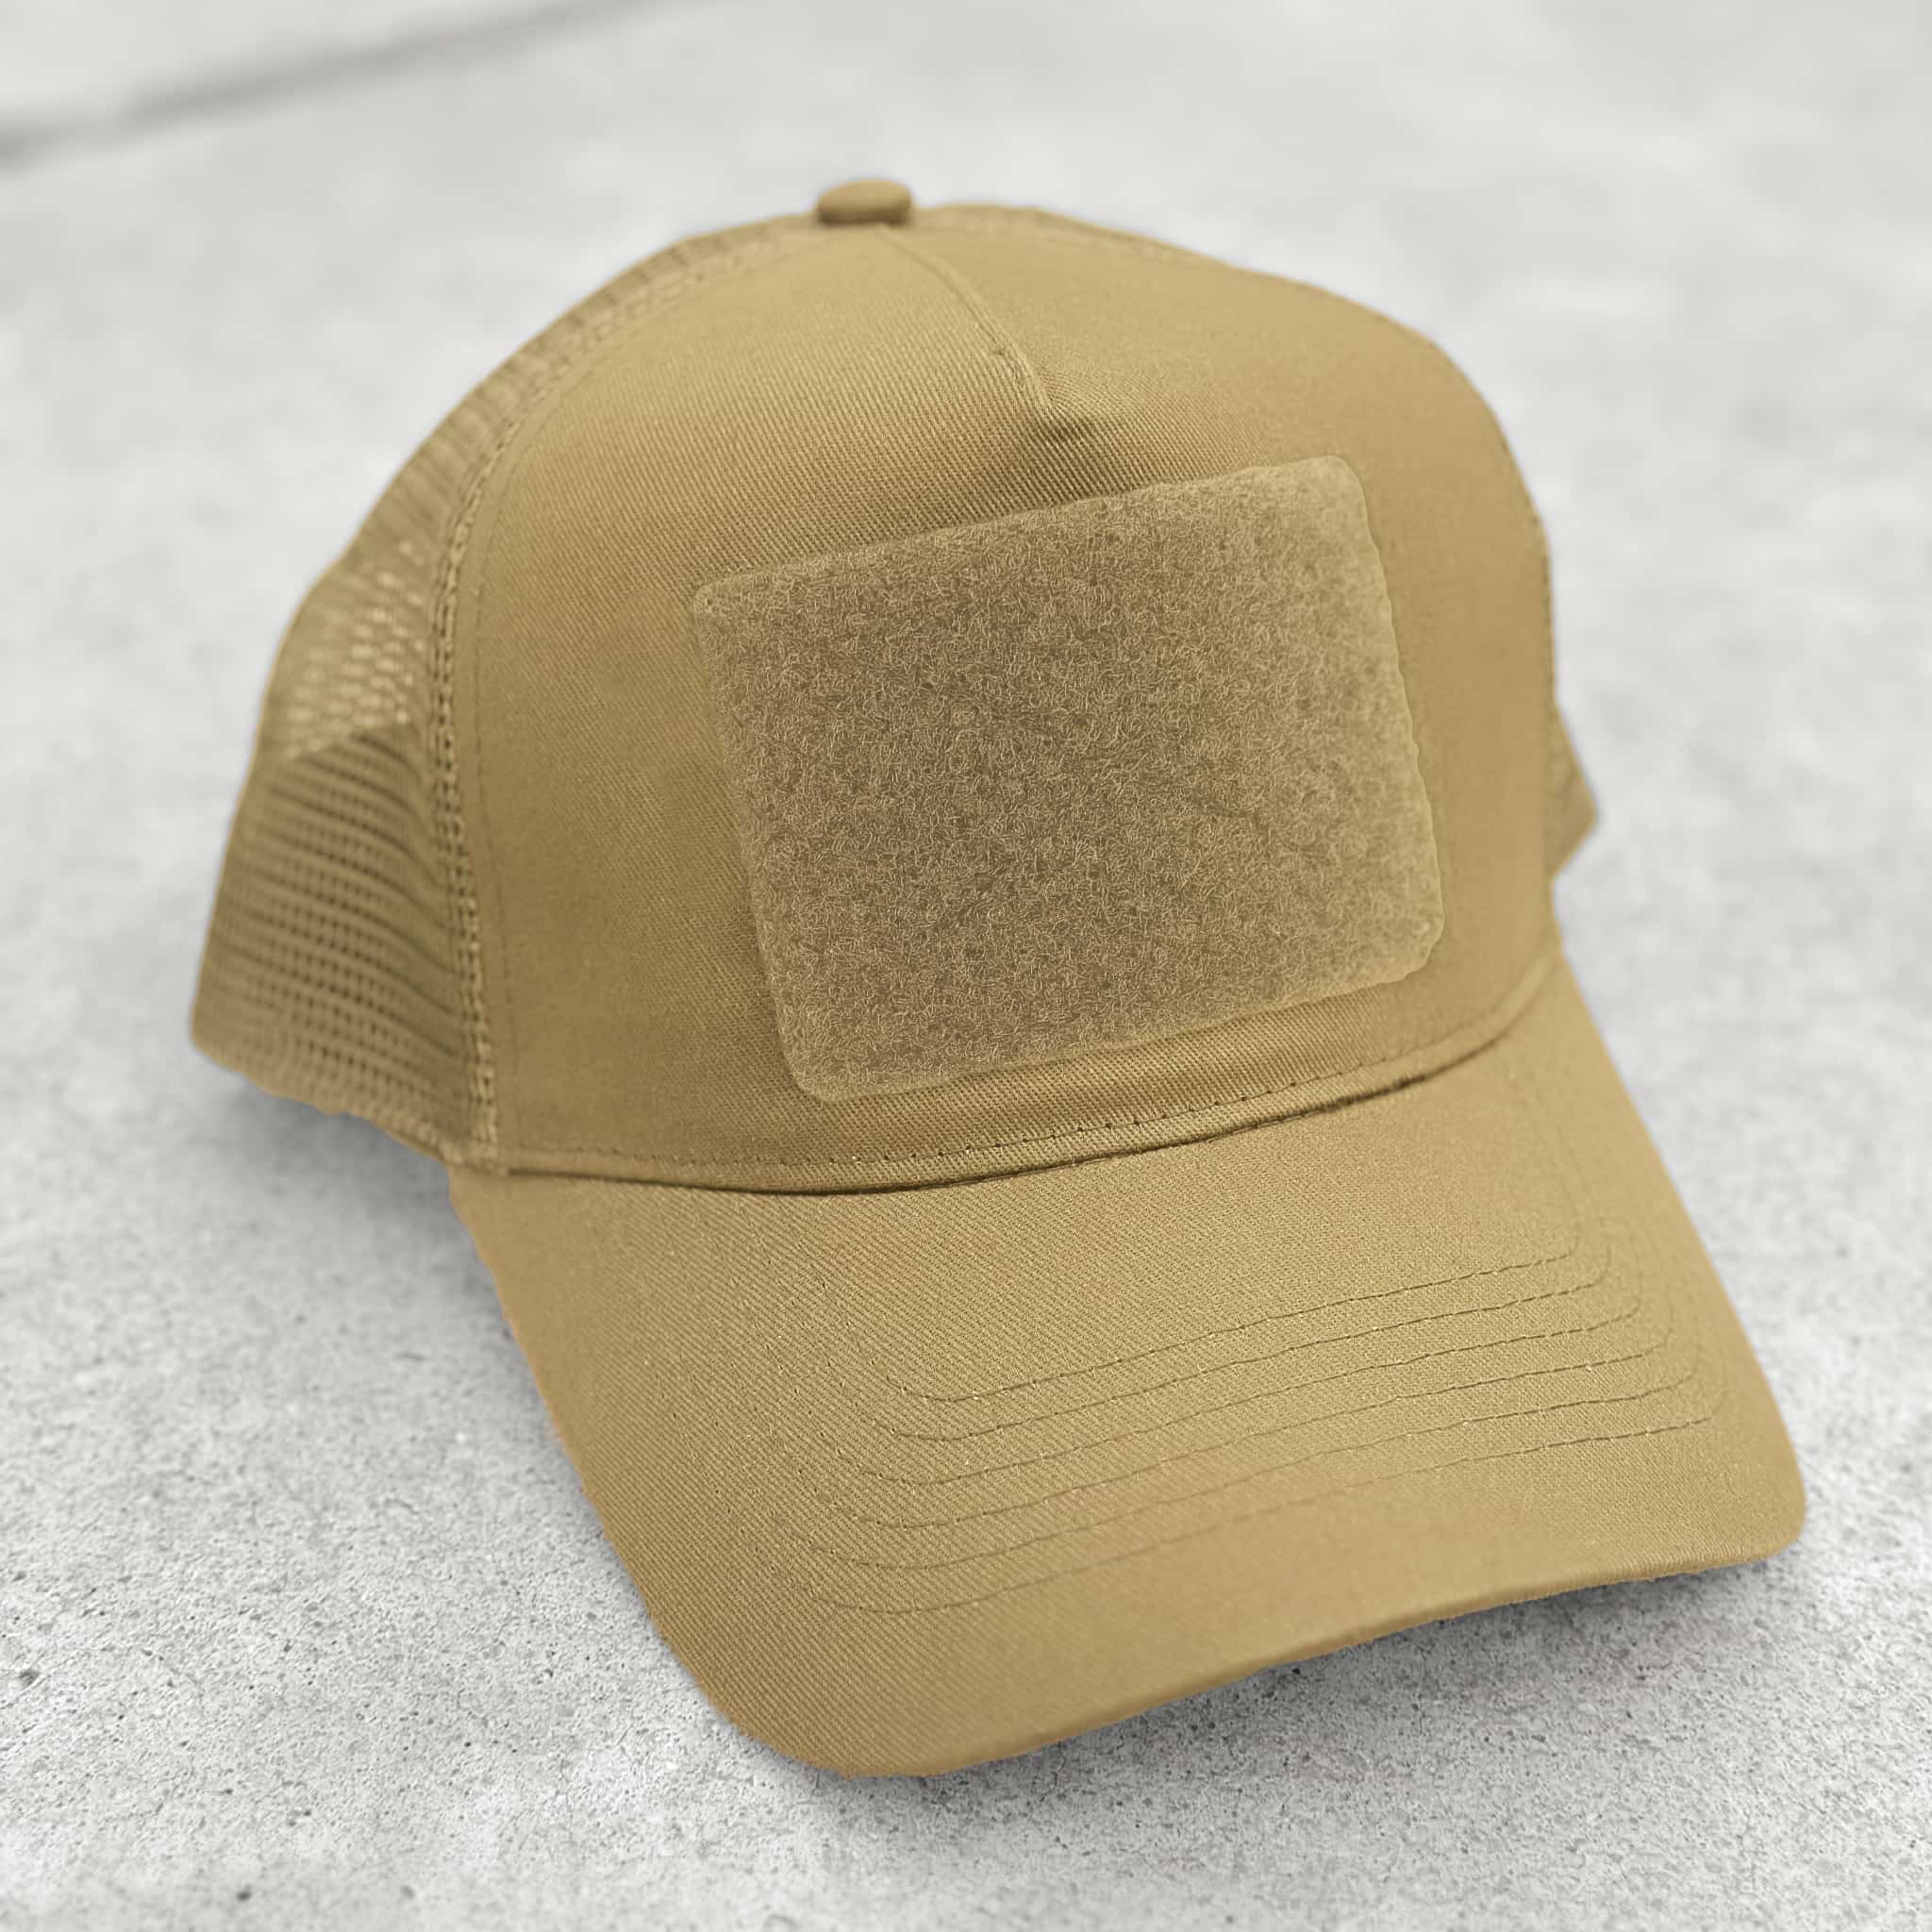 The Blank Canvas Snapback Cap in desert sand color with large hook-and-loop area on the front